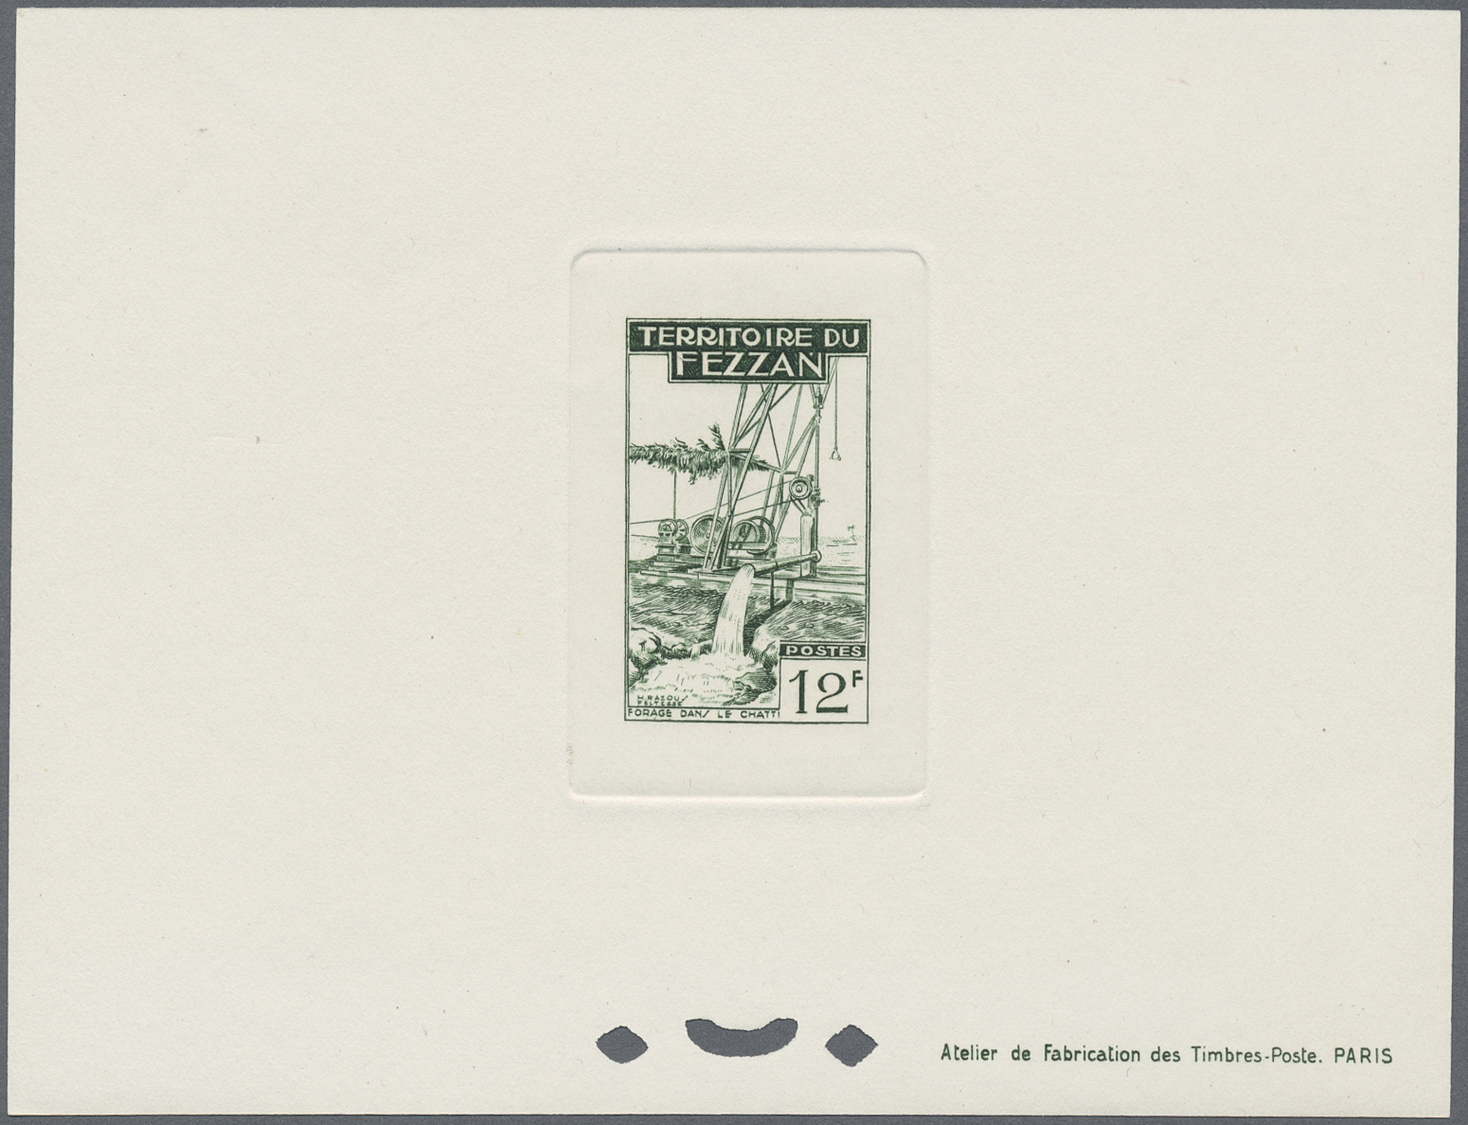 (*) Fezzan: 1951, Definitives "Agriculture", complete set as epreuve de luxe, six of them some slight imperfections. Mau